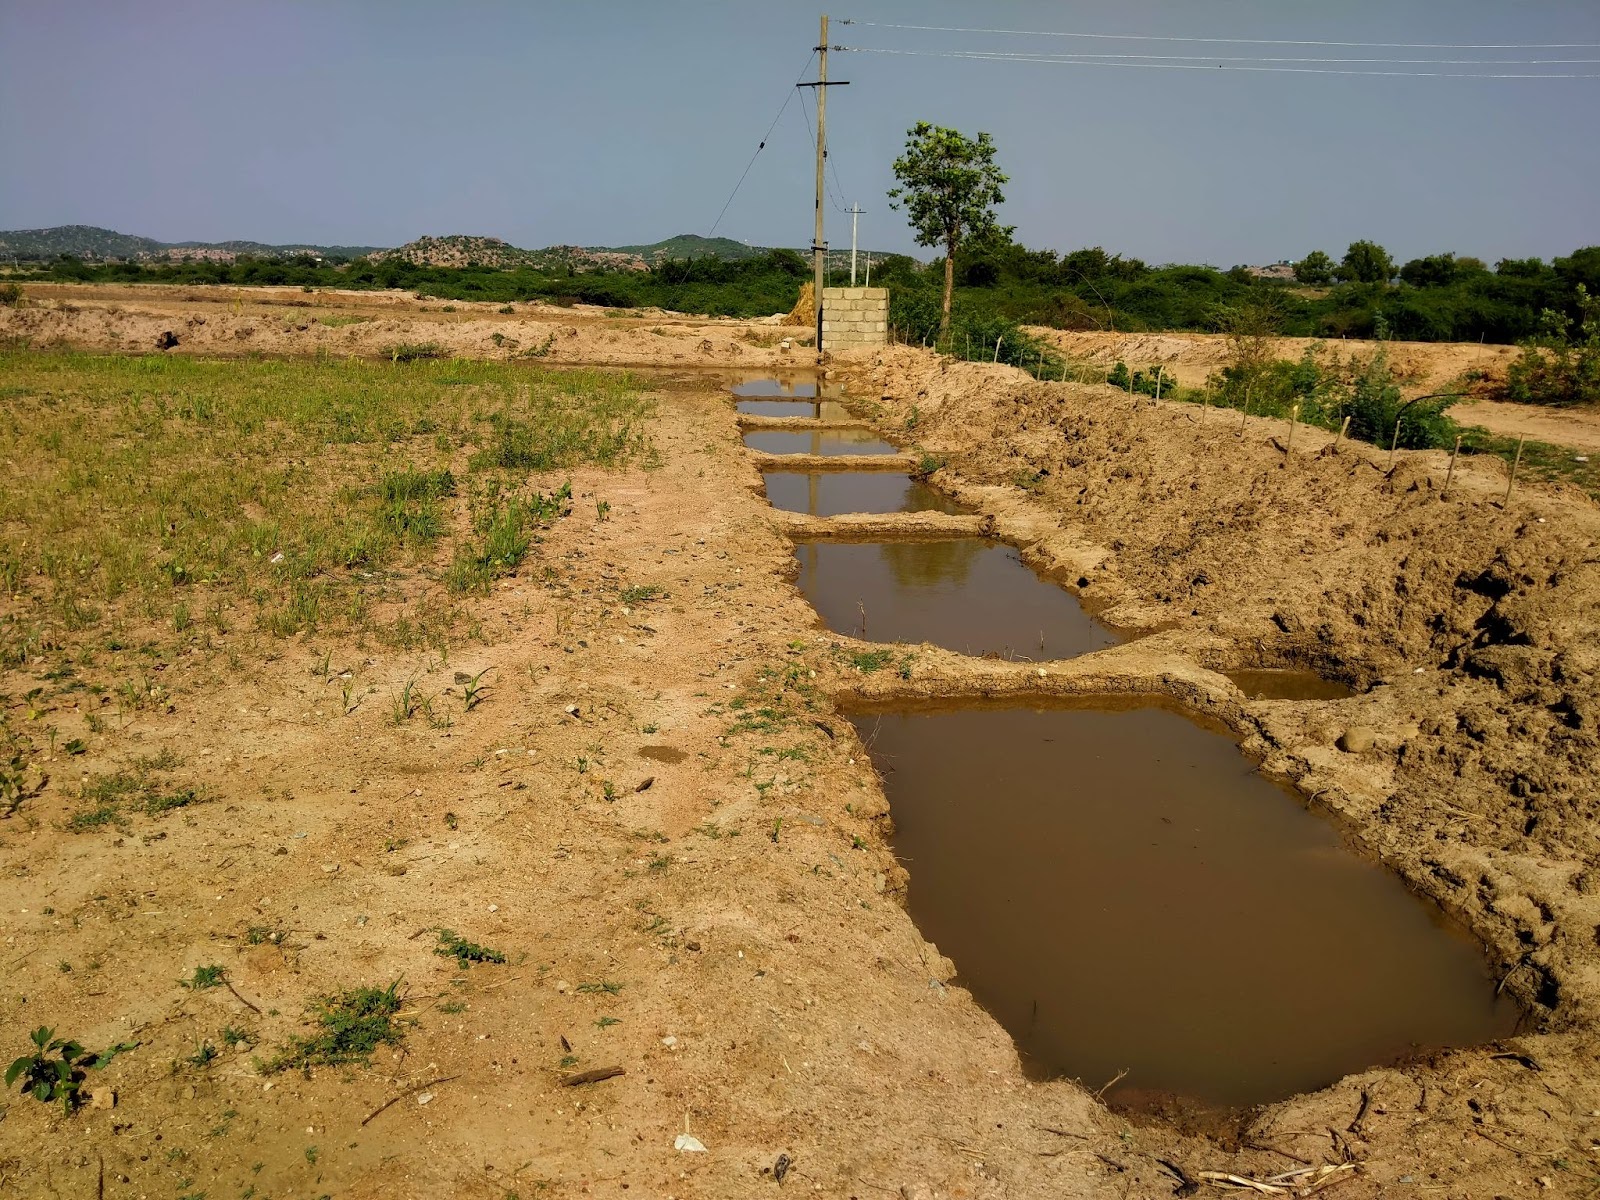 Trench-cum-bund pits are constructed along the edges of fields to prevent rainwater from flowing away.